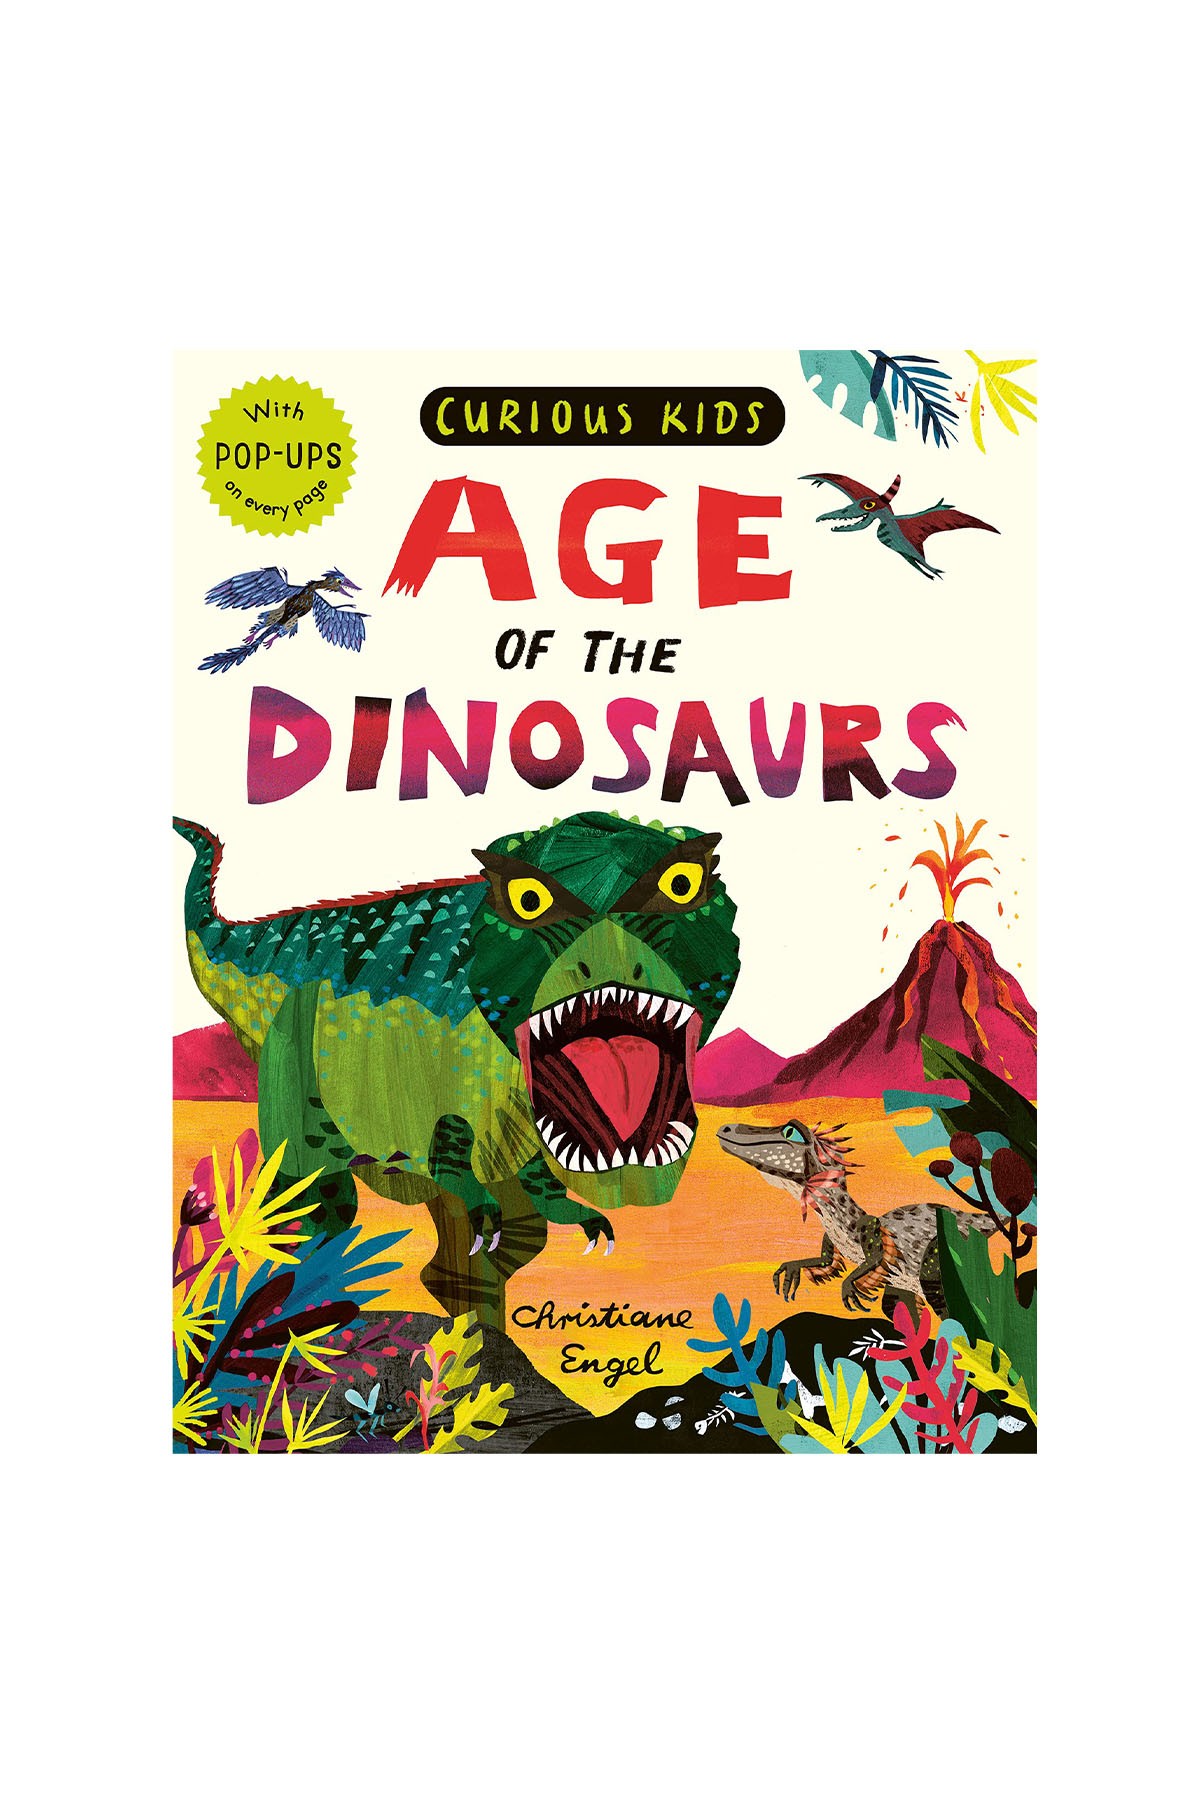 LT - Curious Kids: Age Of The Dinosaurs